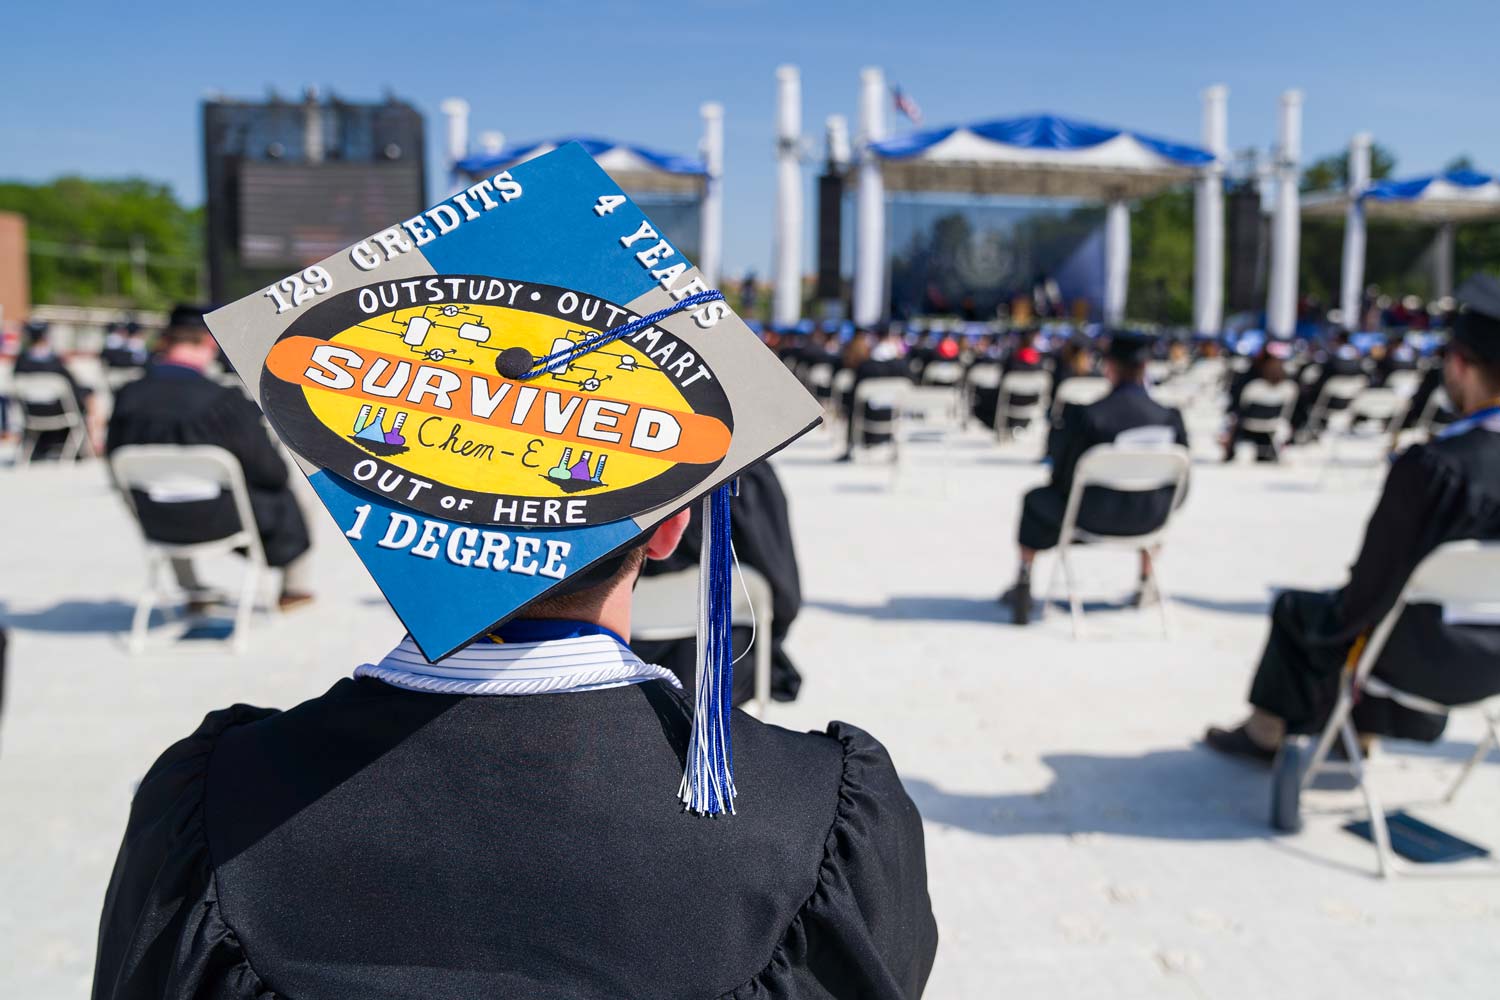 A funny graduation cap that reads "129 credits, 4 years, 1 diploma" surrounding a badge-type drawing stating that they survived their Chemical Engineering degree